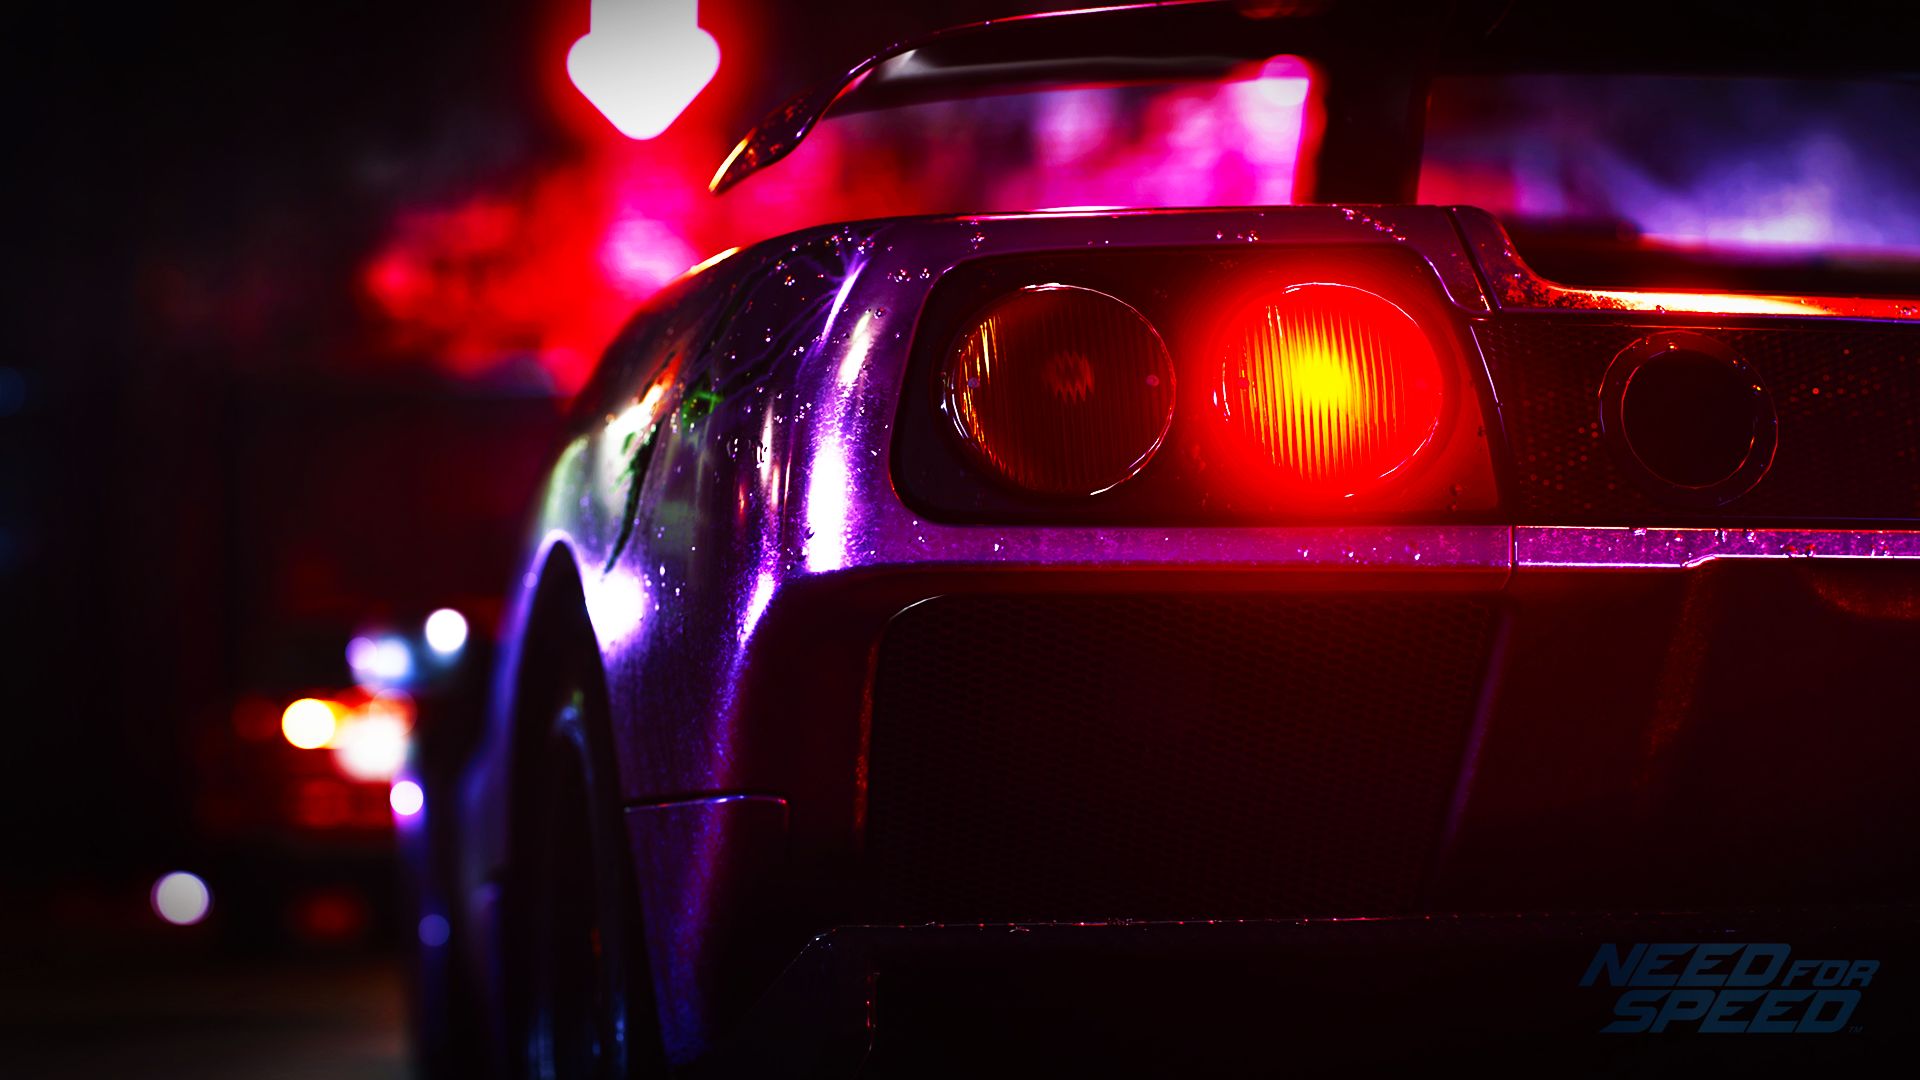  Need For Speed (2015) Full HD Wallpaper